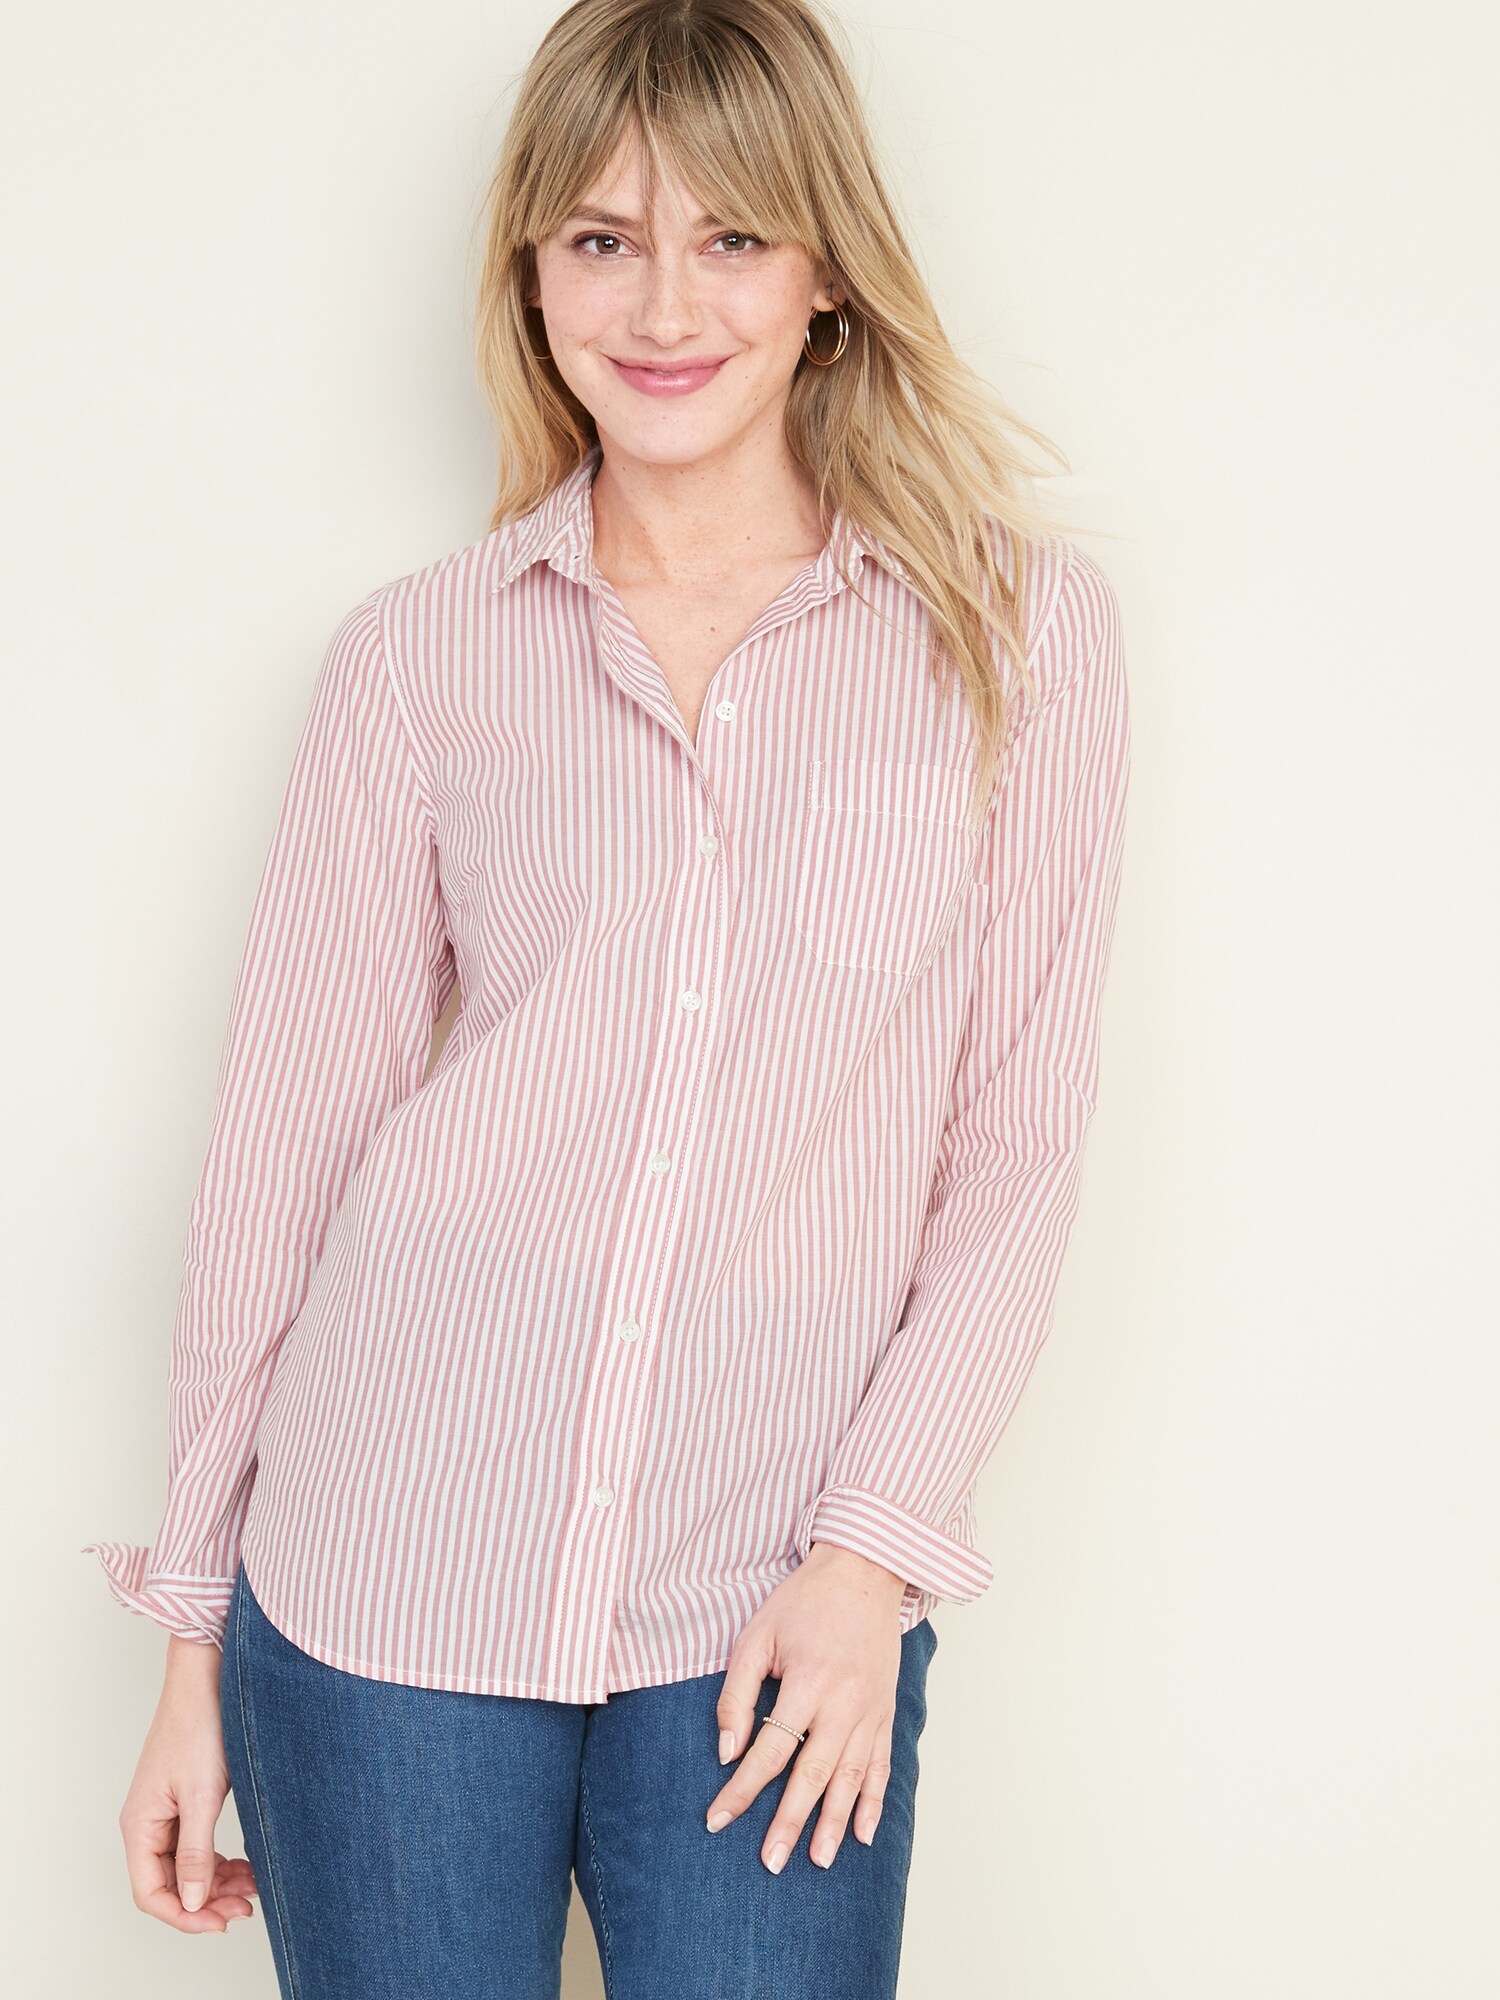 Classic Patterned Shirt for Women